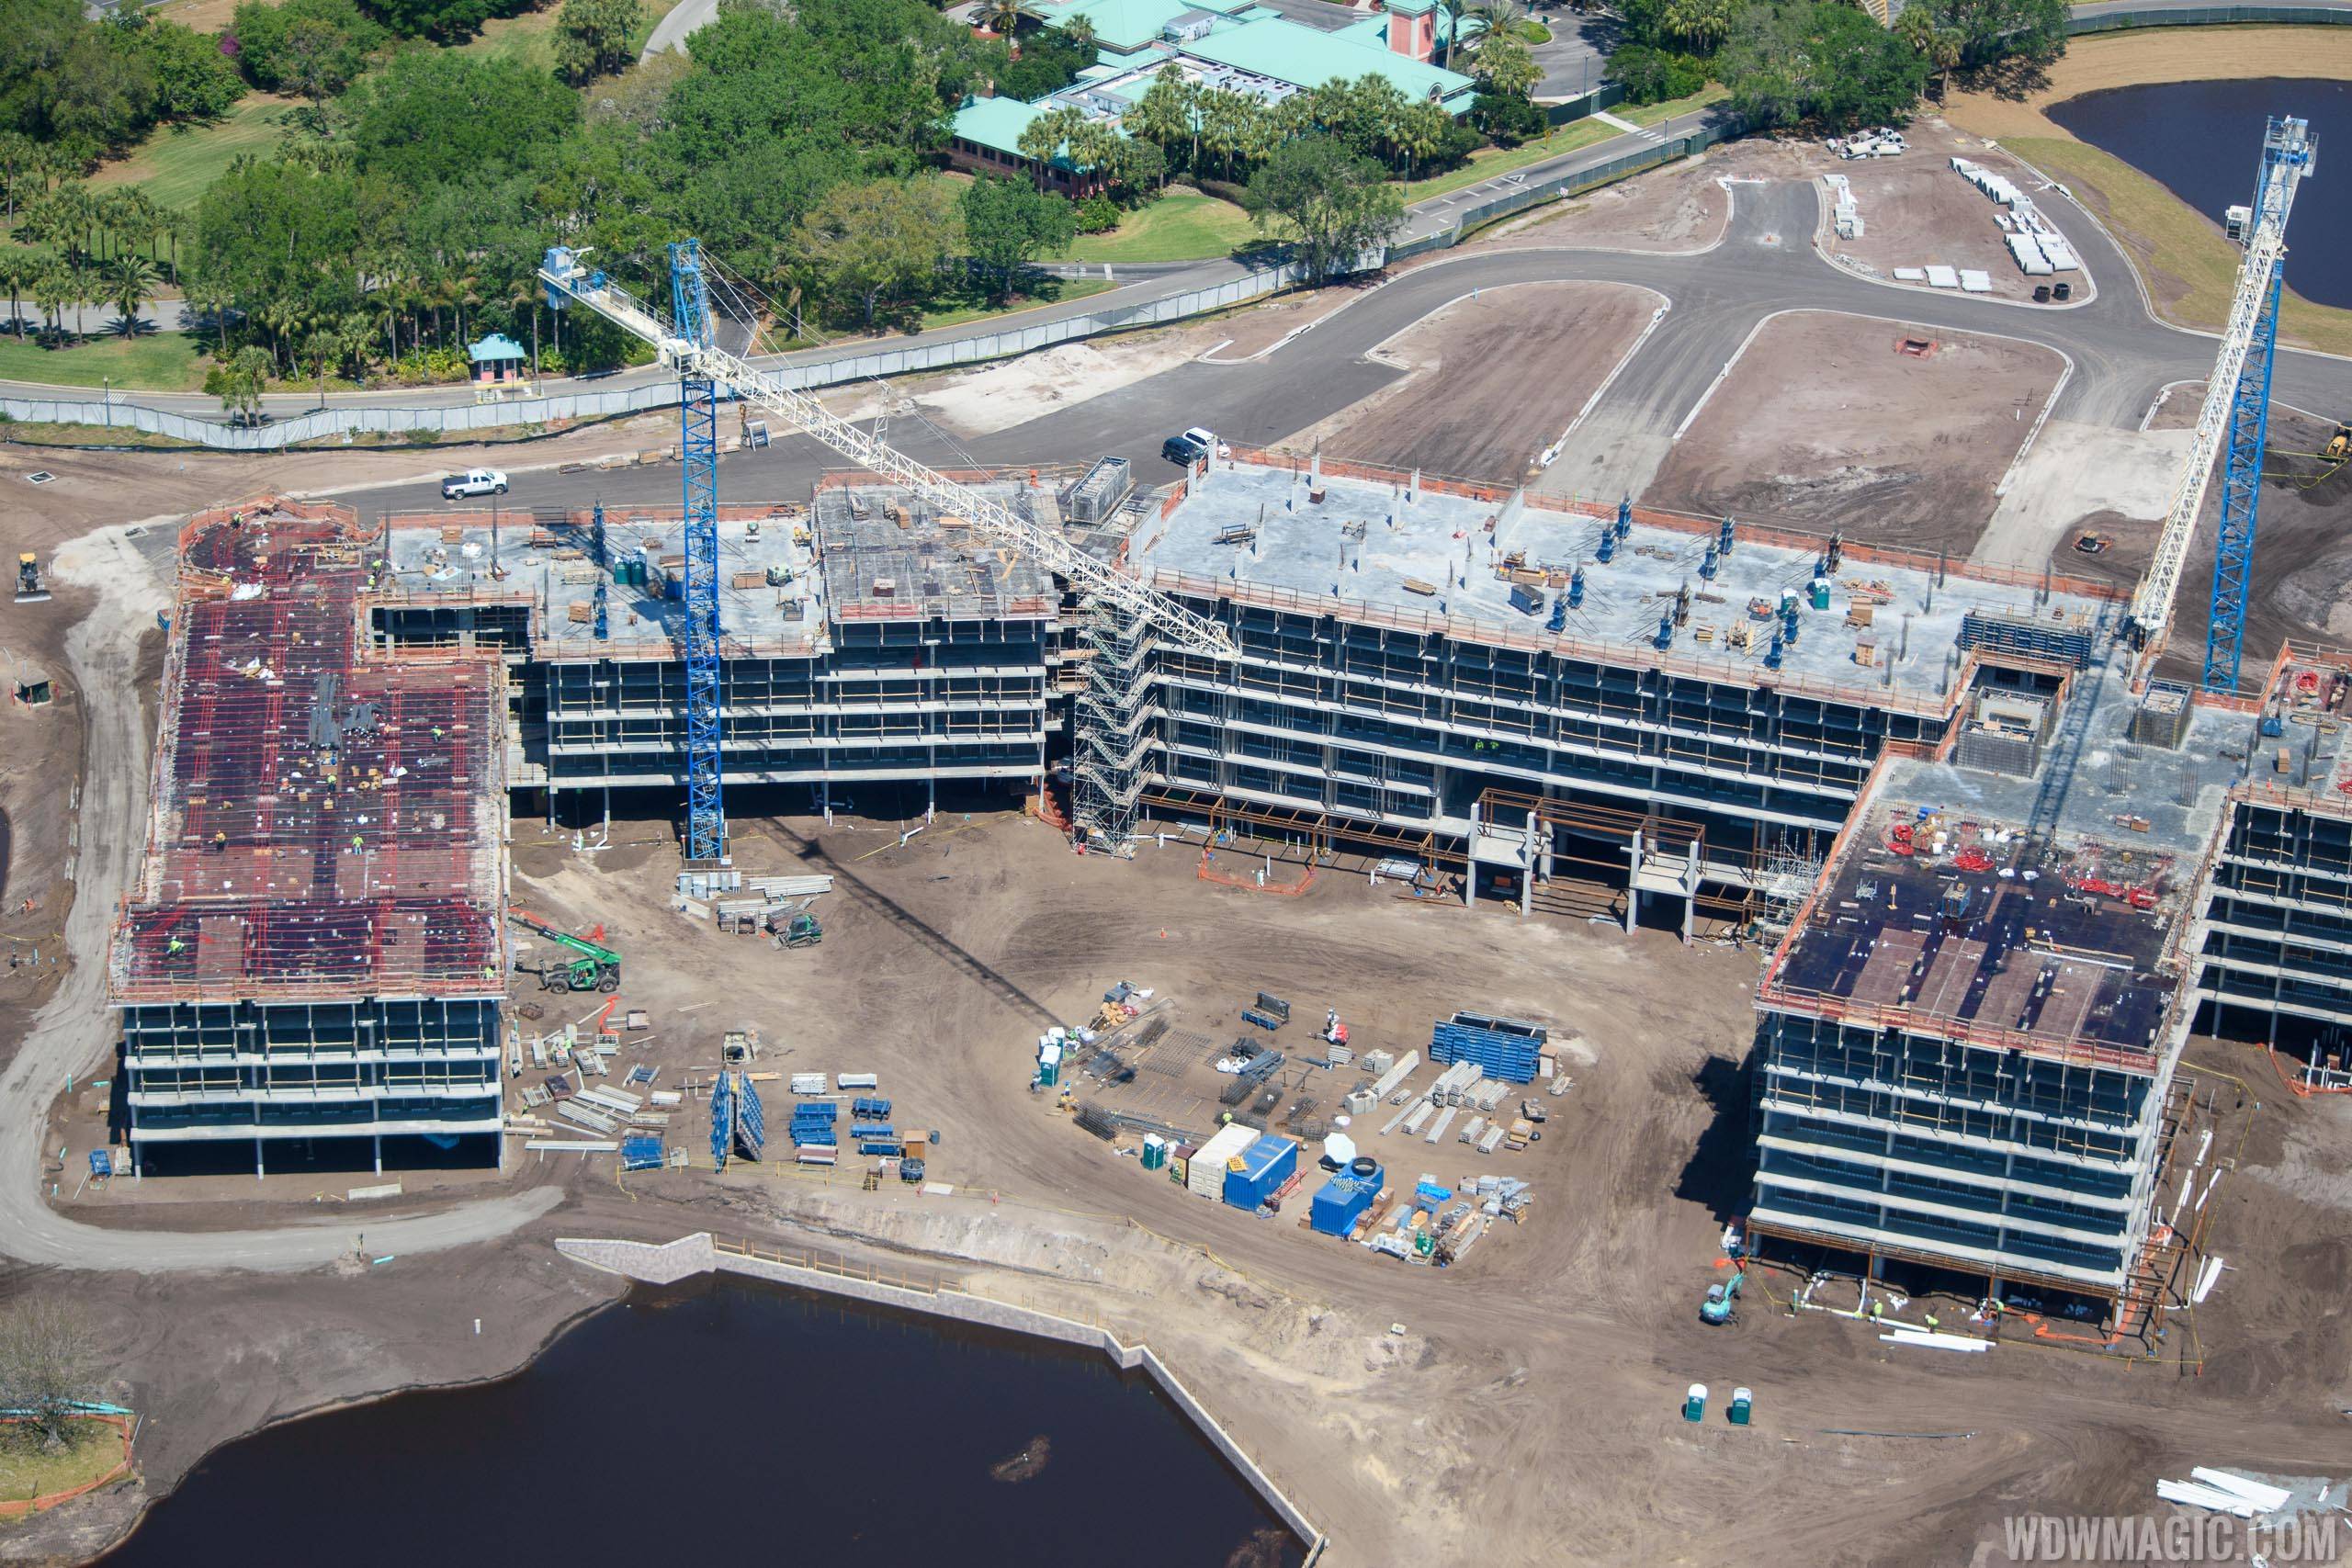 Disney Riviera construction from the air - March 2018